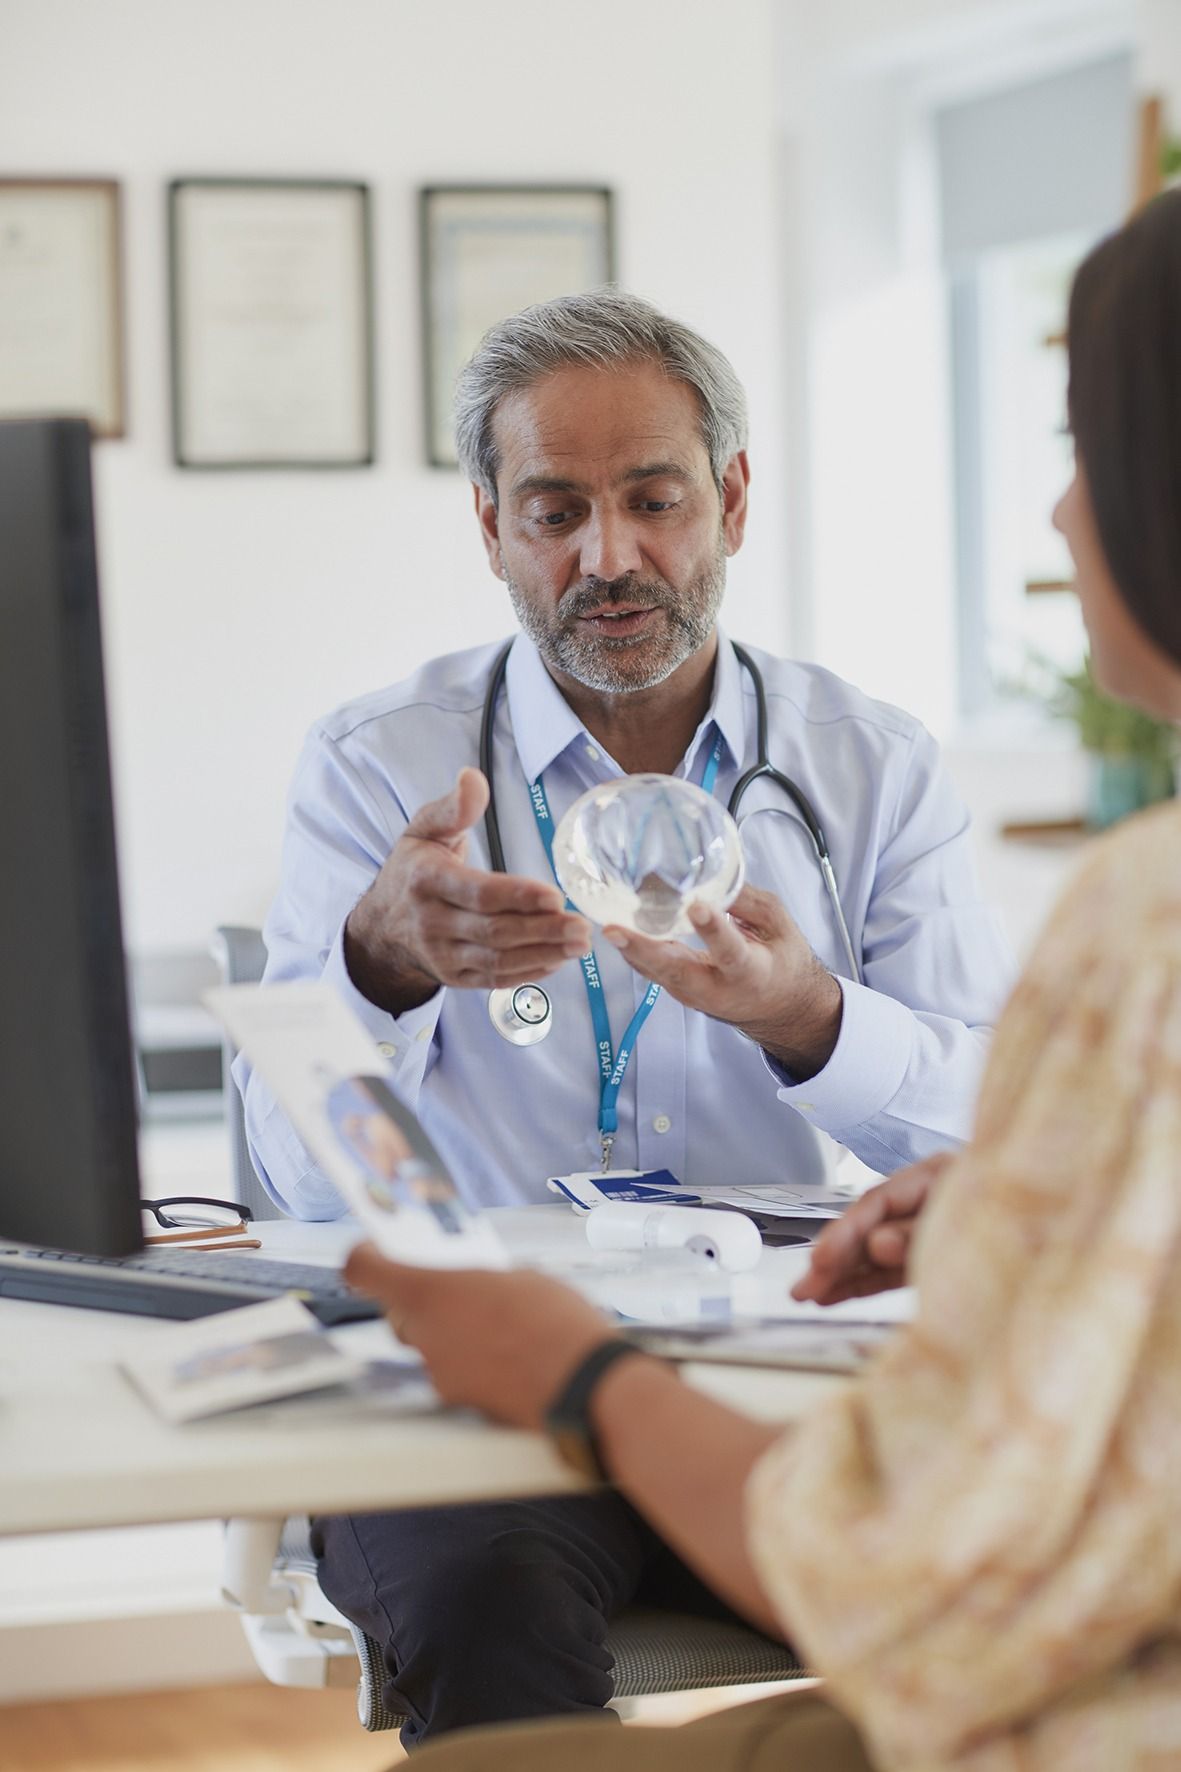 A doctor is holding a model of a heart while talking to a patient.